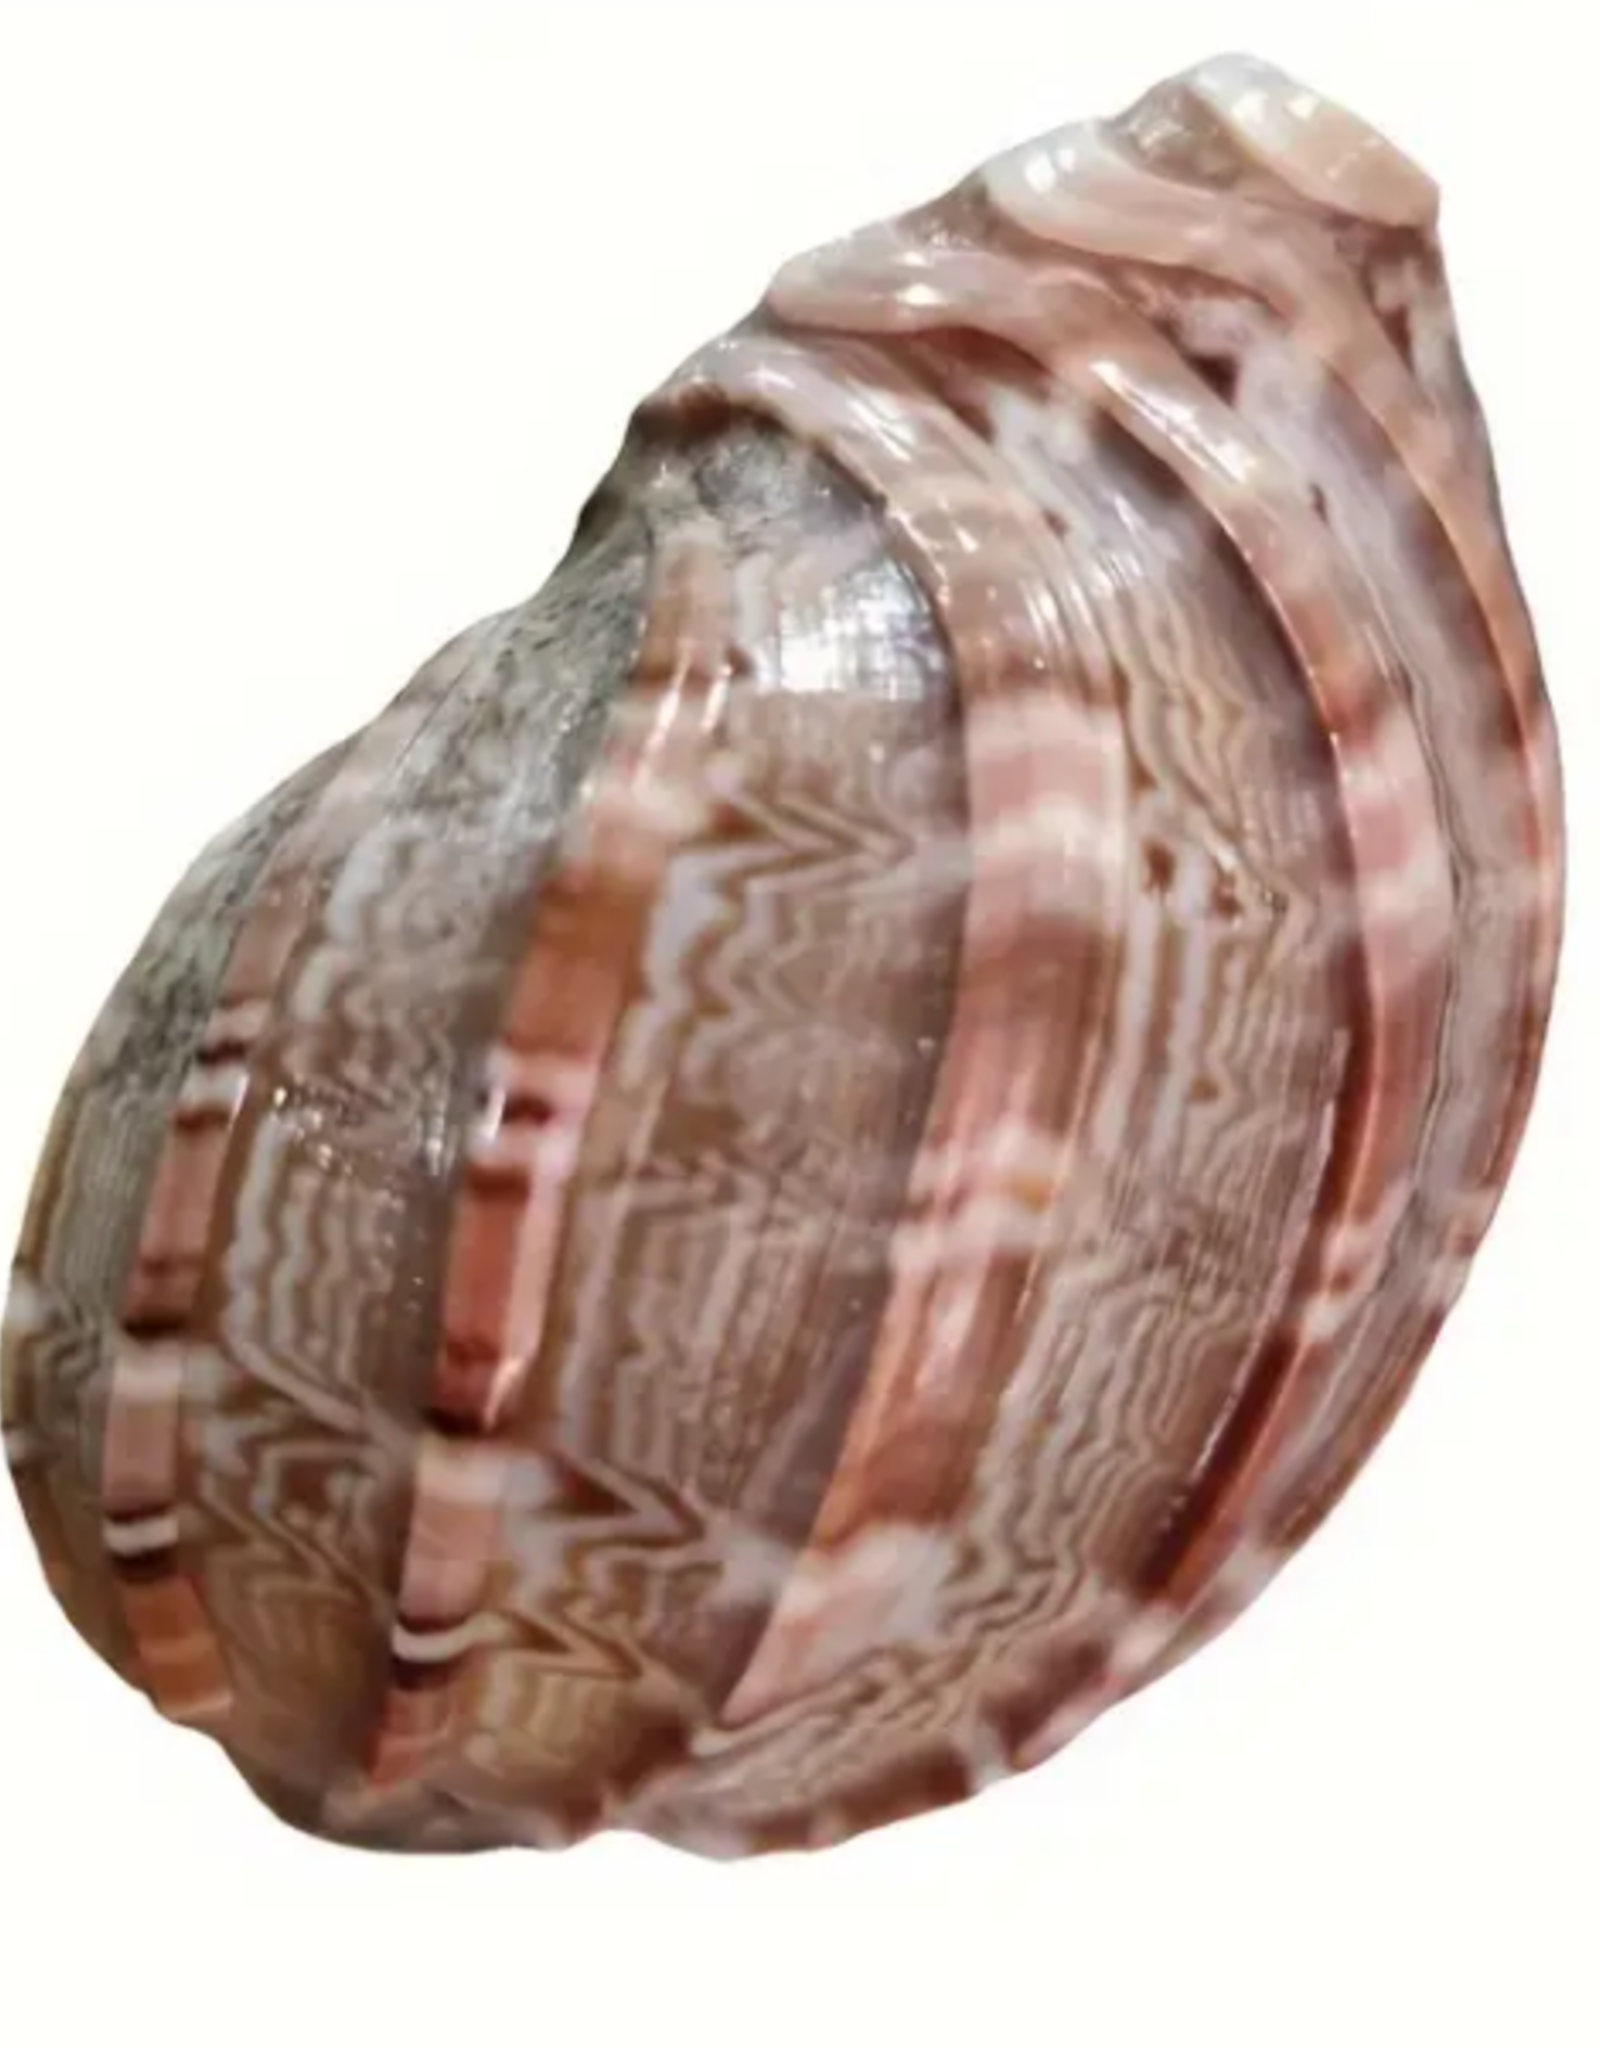 ZOO MED LABORATORIES, INC. HERMIT CRAB SHELL- 3X2.5-3X4- EXTRA-EXTRA LARGE- *SHELL DESIGN VARIES